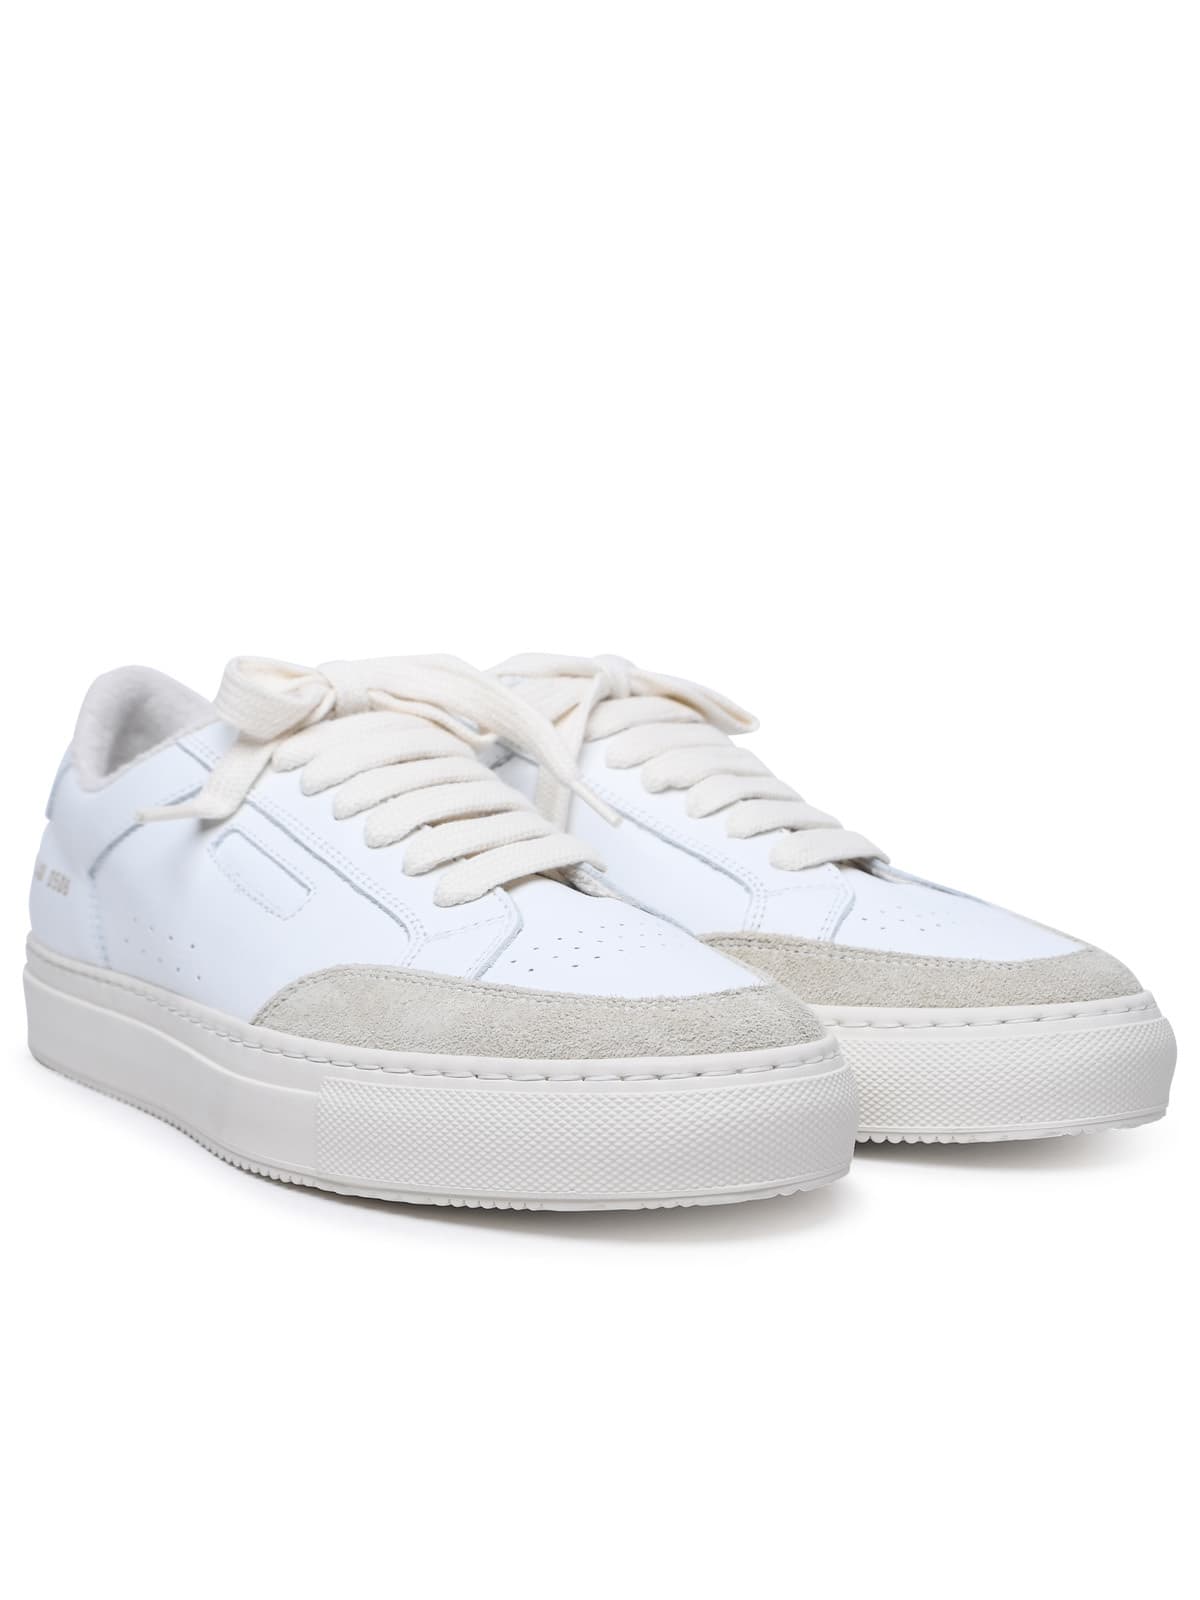 Shop Common Projects Tennis Pro White Leather Sneakers